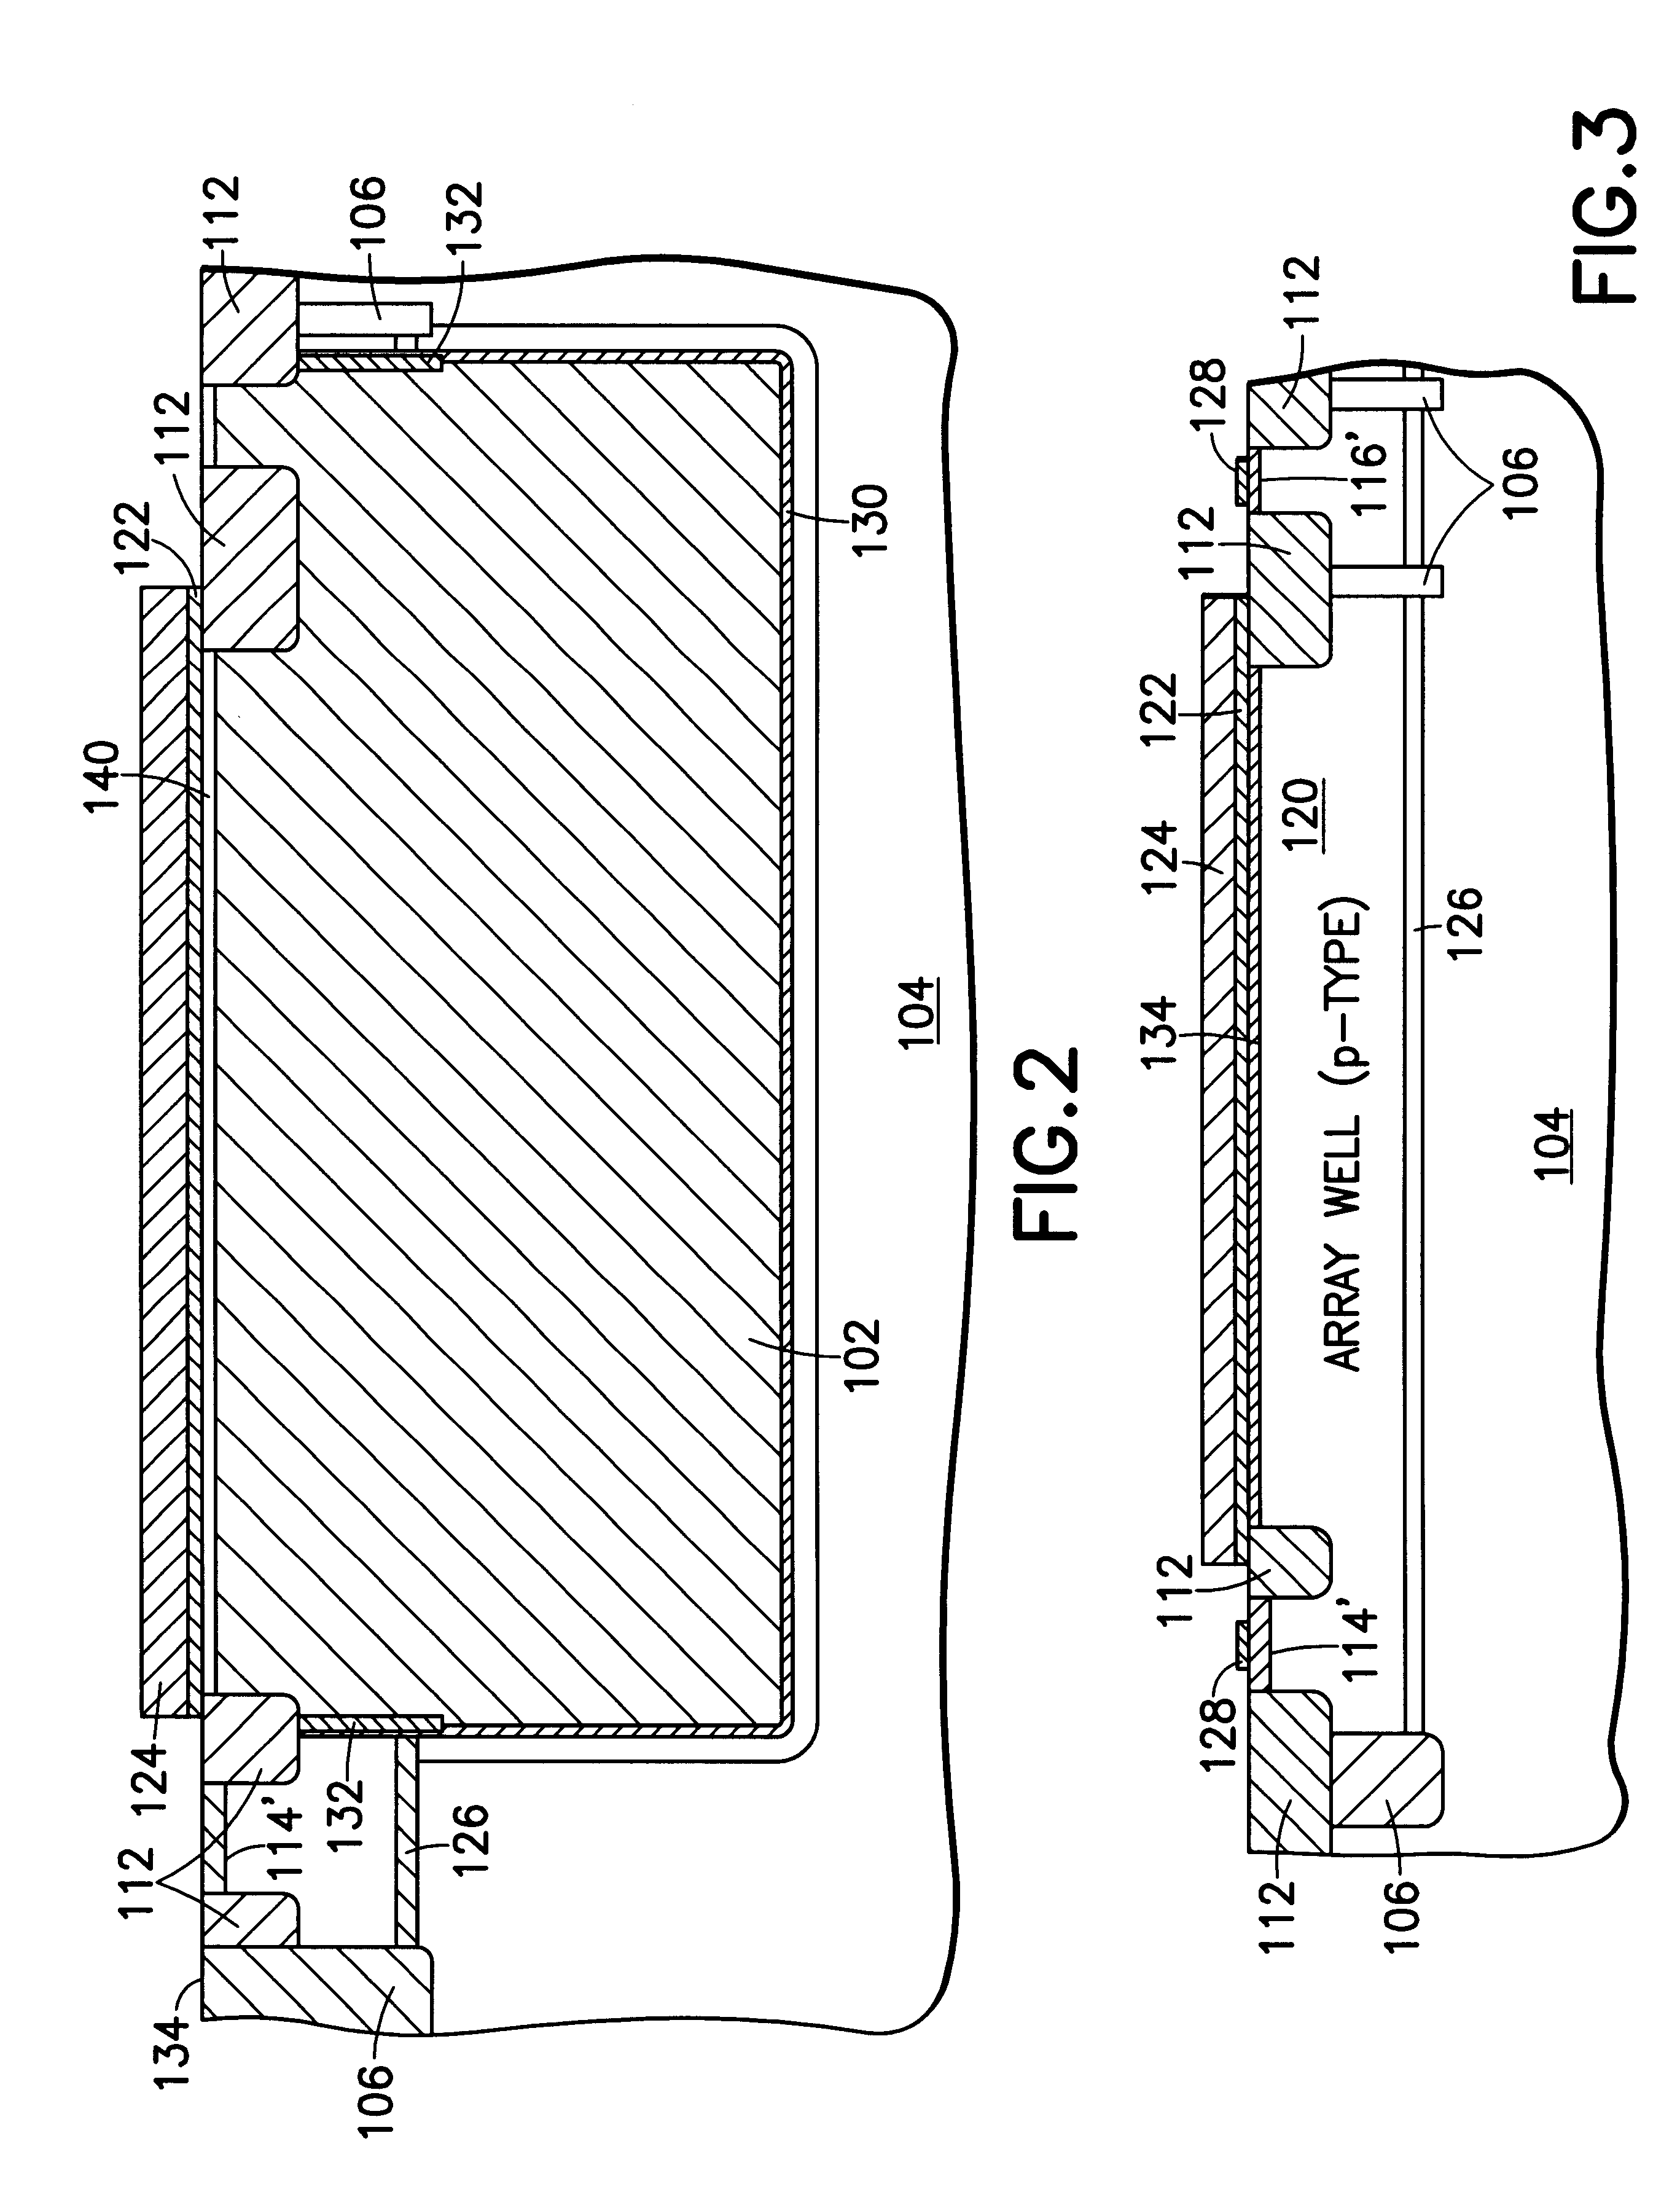 DRAM cell buried strap leakage measurement structure and method